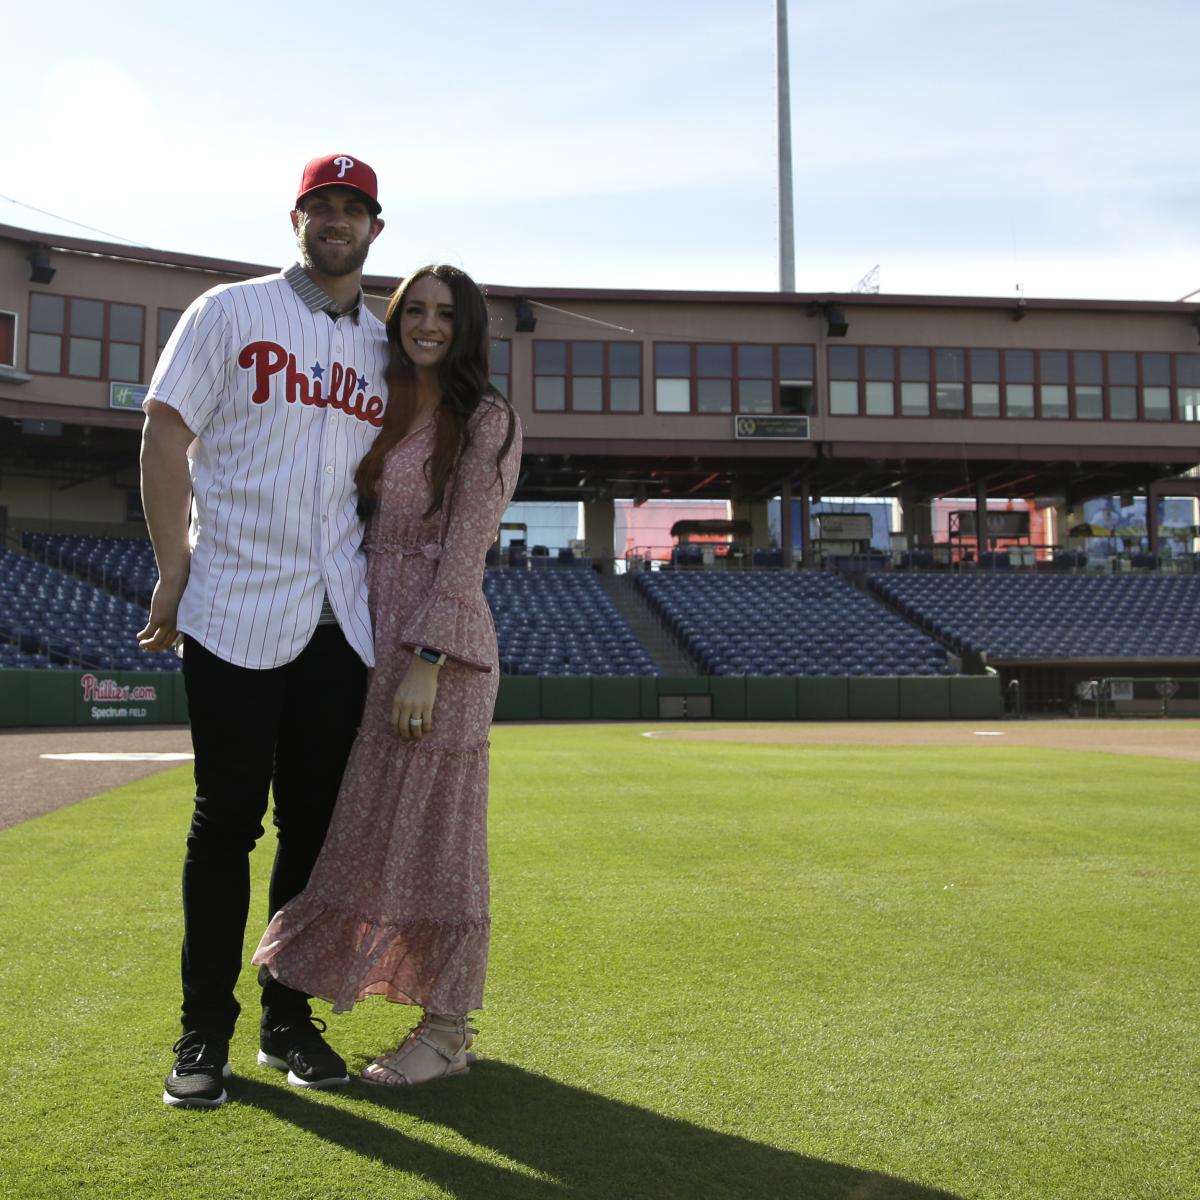 Bryce Harper's Wife Kayla Announces She's Pregnant with Their 1st